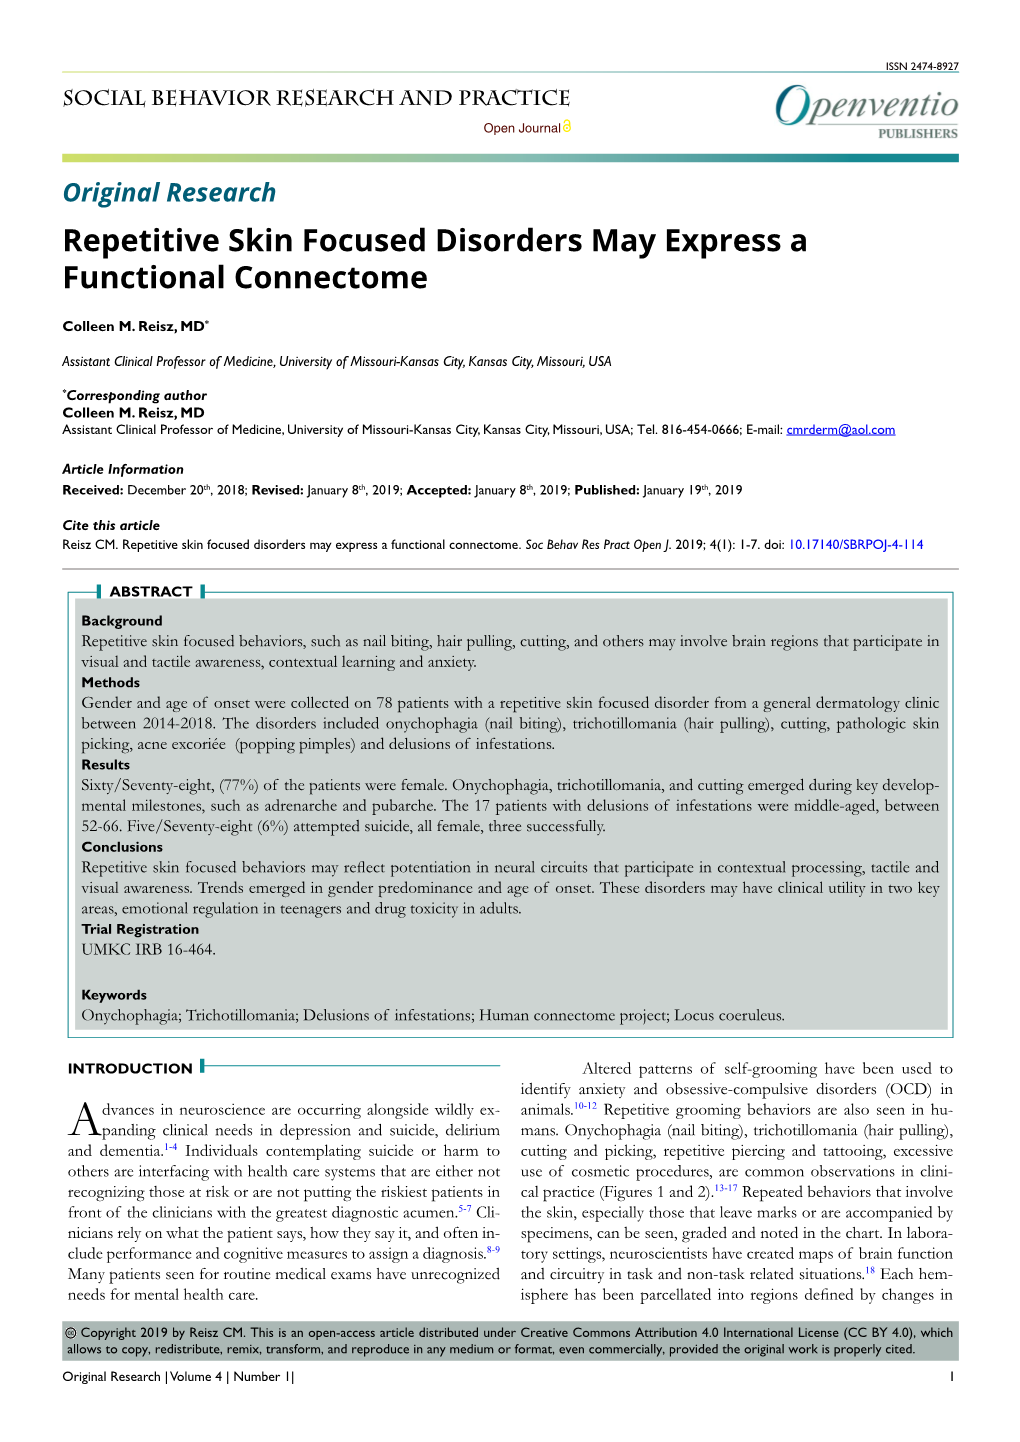 Repetitive Skin Focused Disorders May Express a Functional Connectome